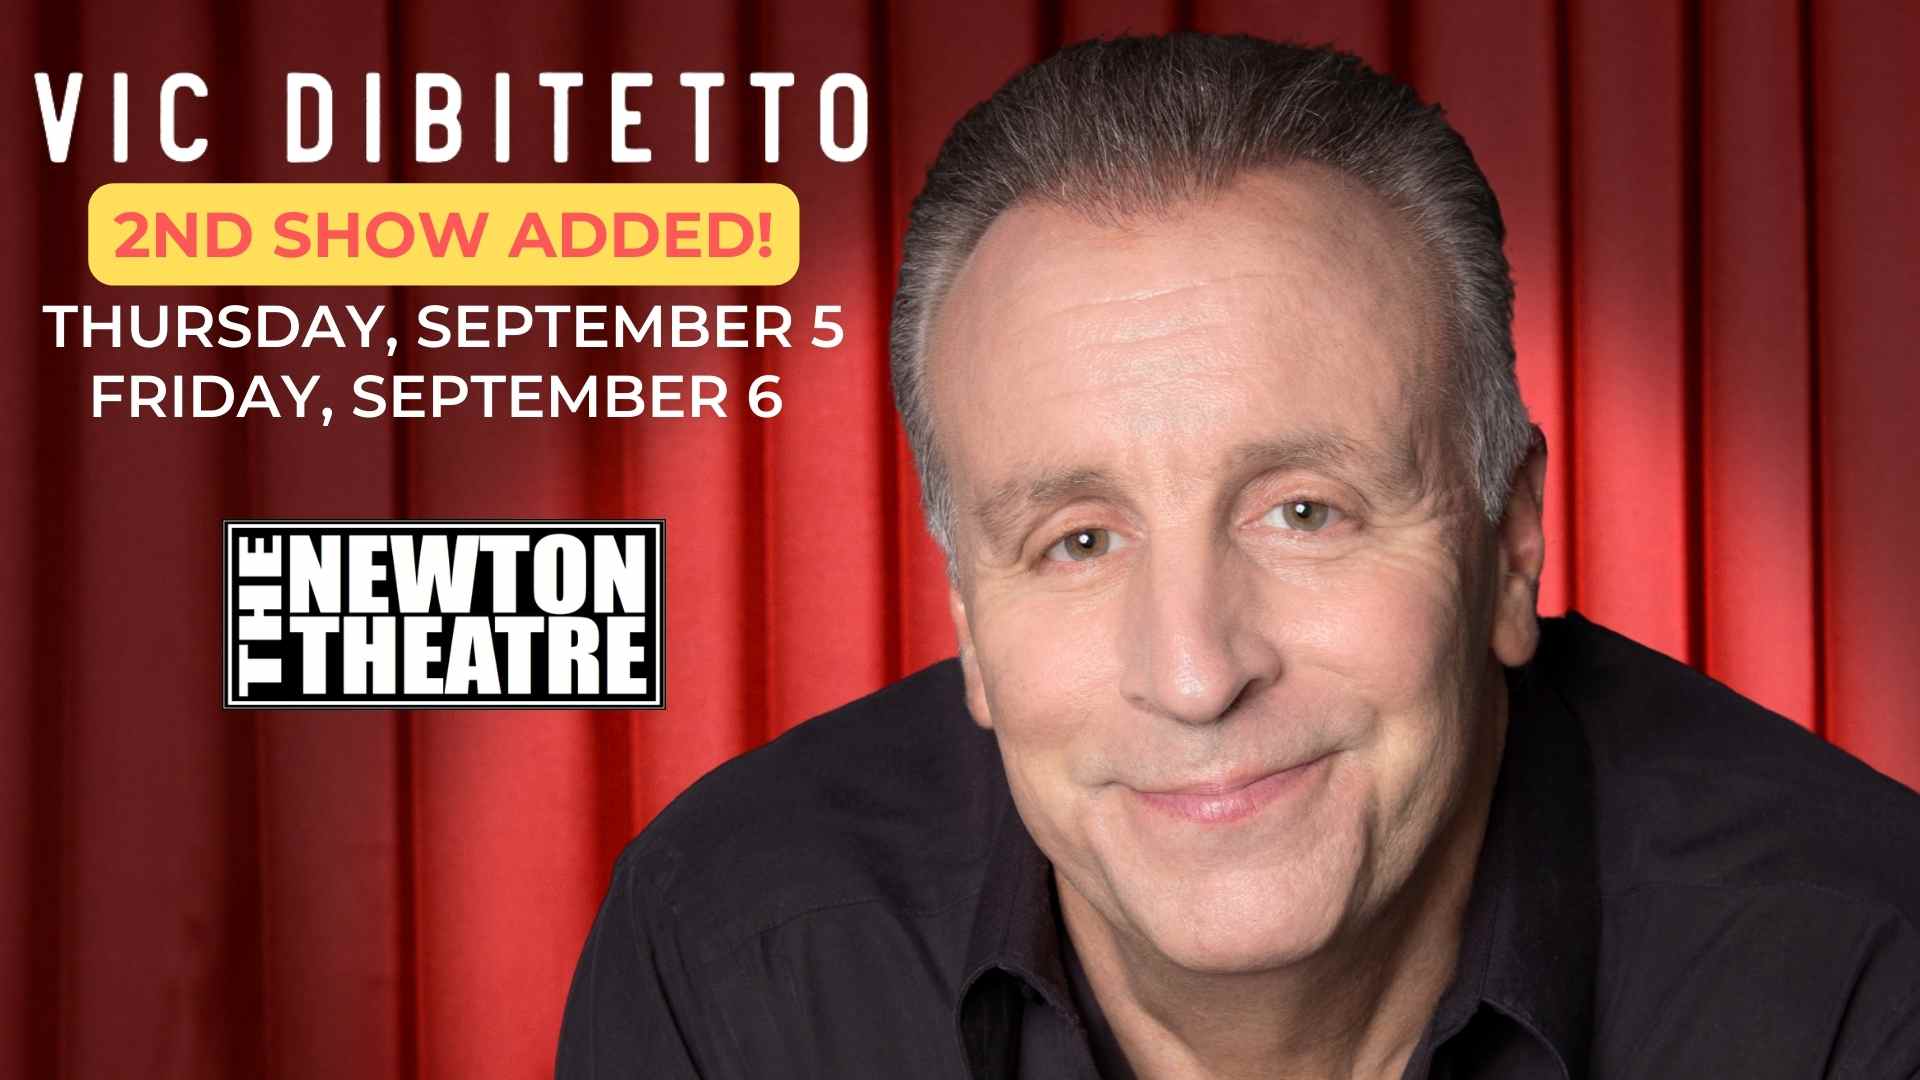 Vic Dibitetto comes to The Newton Theatre on September 5th & 6th.